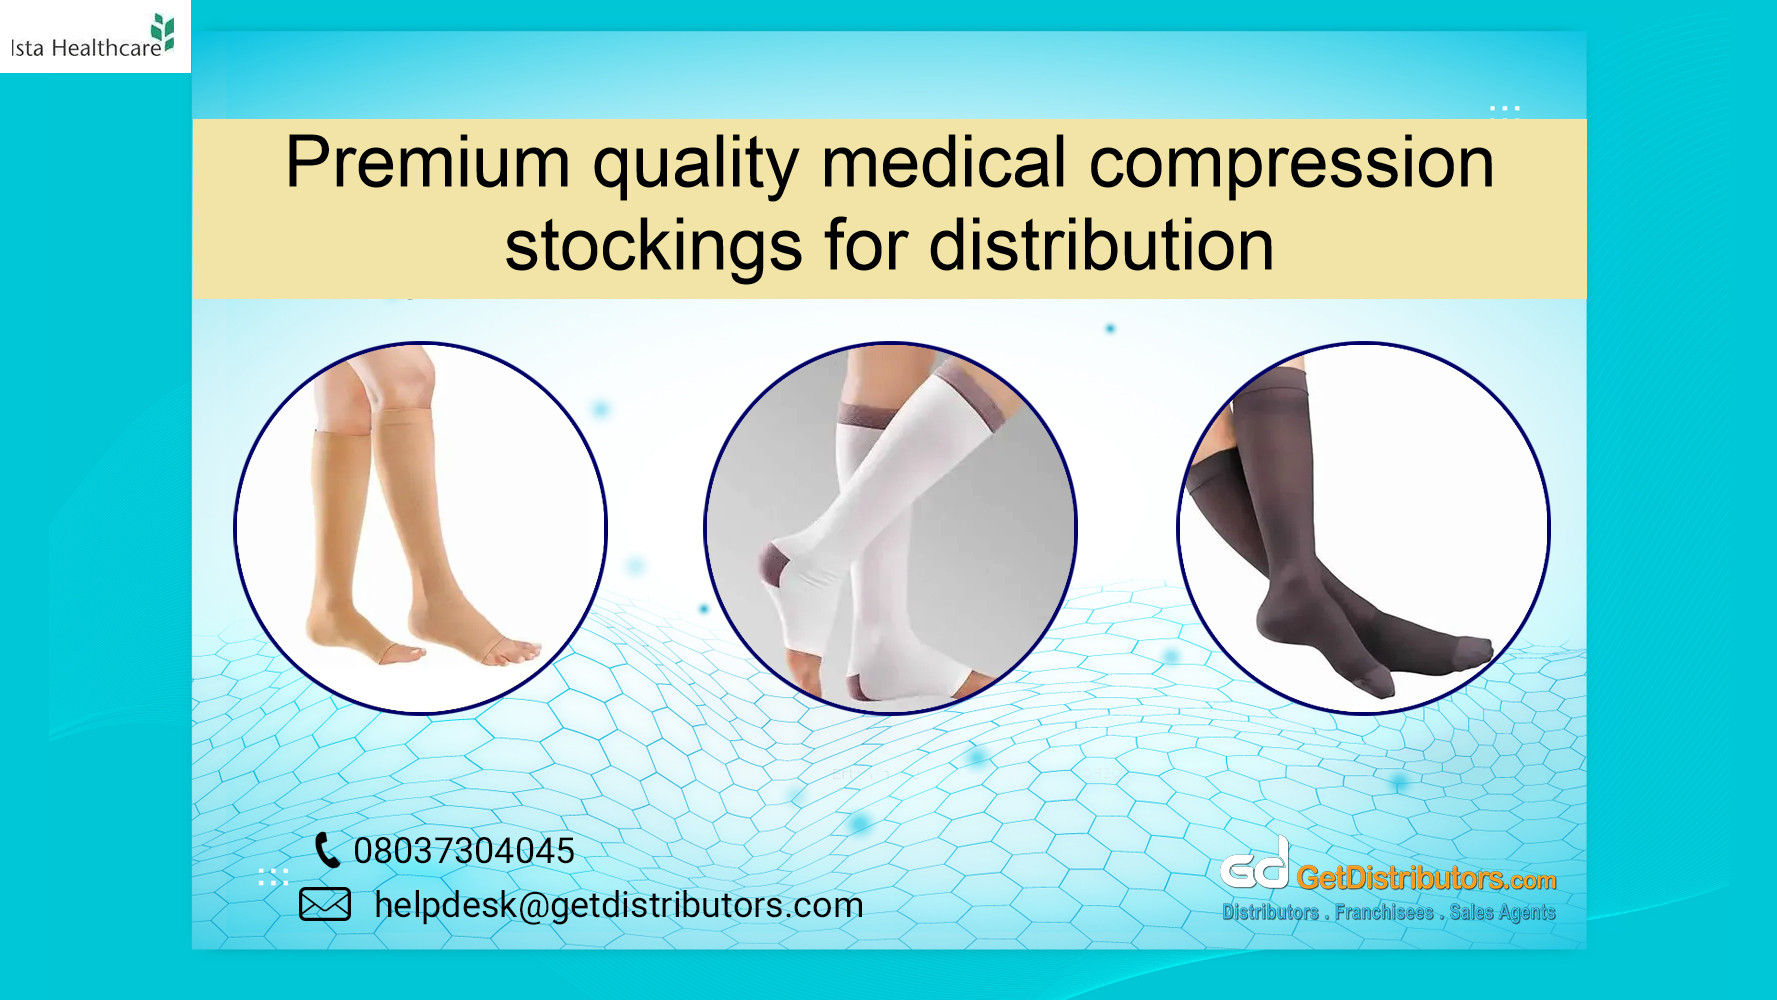 Premium quality medical compression stockings for distribution